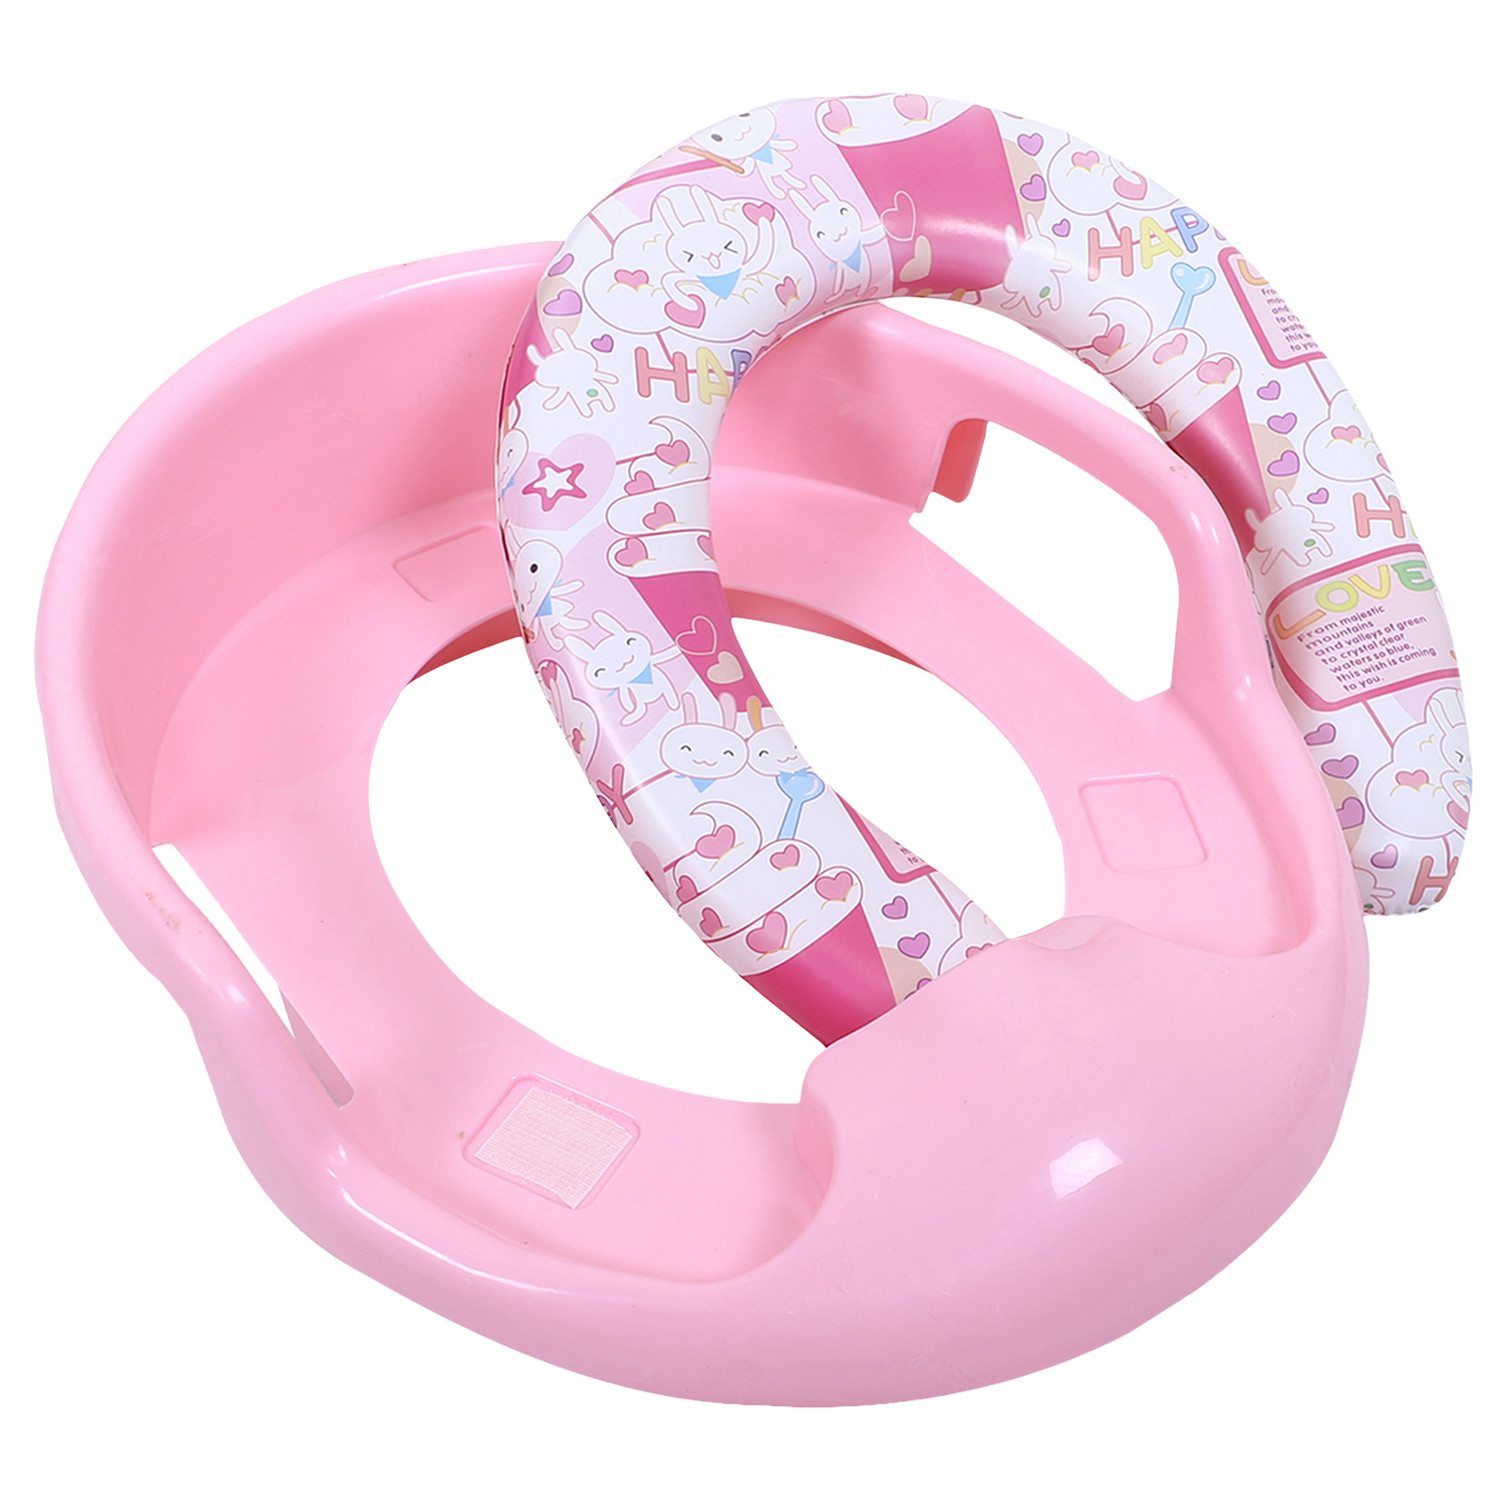 Kuber Industries Kids Potty Seat | Plastic Cushioned Potty Seat | Kids Toilet Seat with Handle | Potty Training Seat for Kids | Cushioned Toilet Stand for Kids | Pink